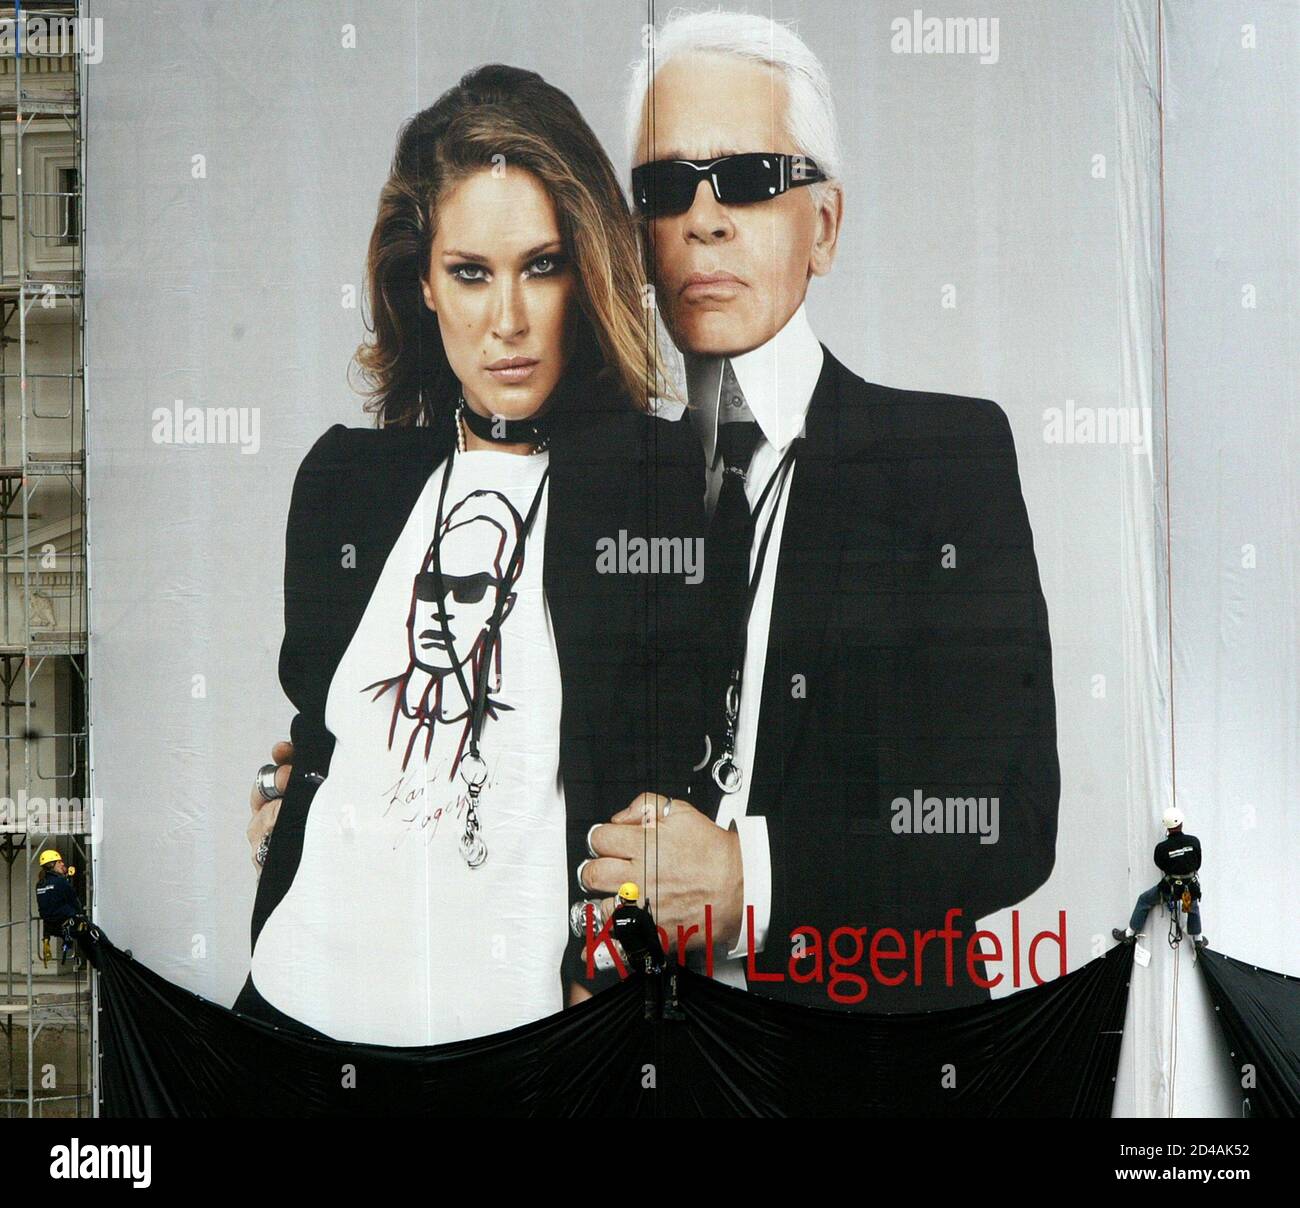 Abseiling workers unveil a giant 1,500 square metre advertisement for  Swedish fashion retailer H&M showing German-born fashion designer Karl  Lagerfeld and U.S. model Erin Wasson on the Unter den Linden boulevard in